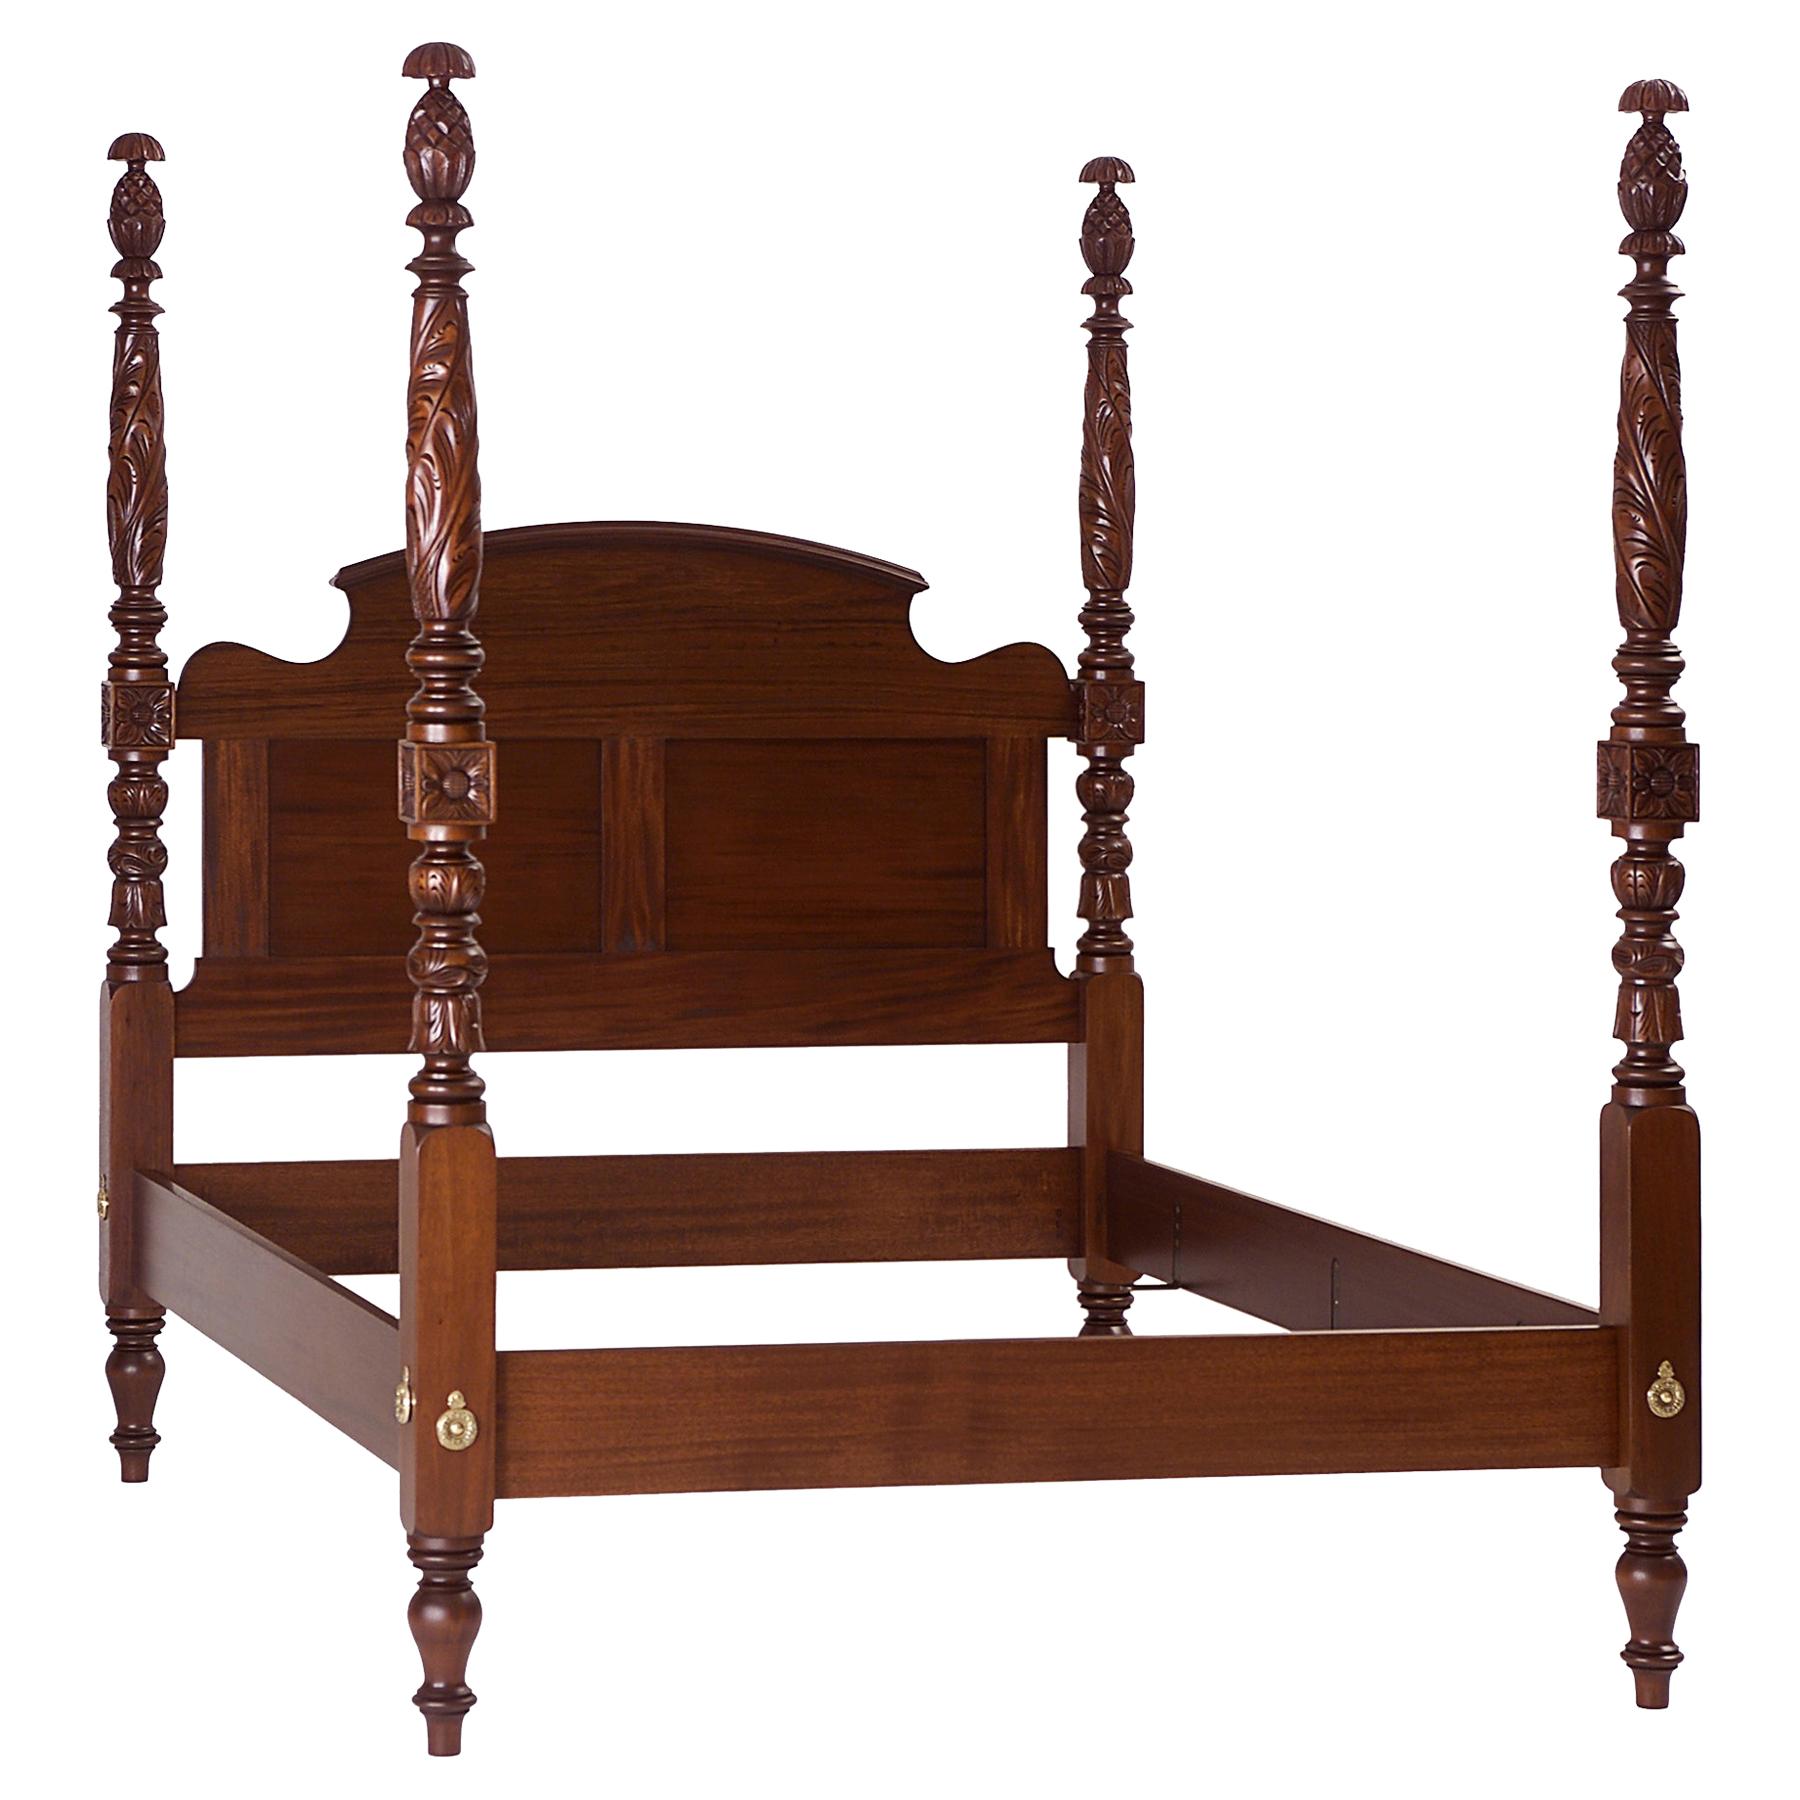 Queen Mahogany Four Poster Turned and Carved bed with Paneled Crown Headboard For Sale